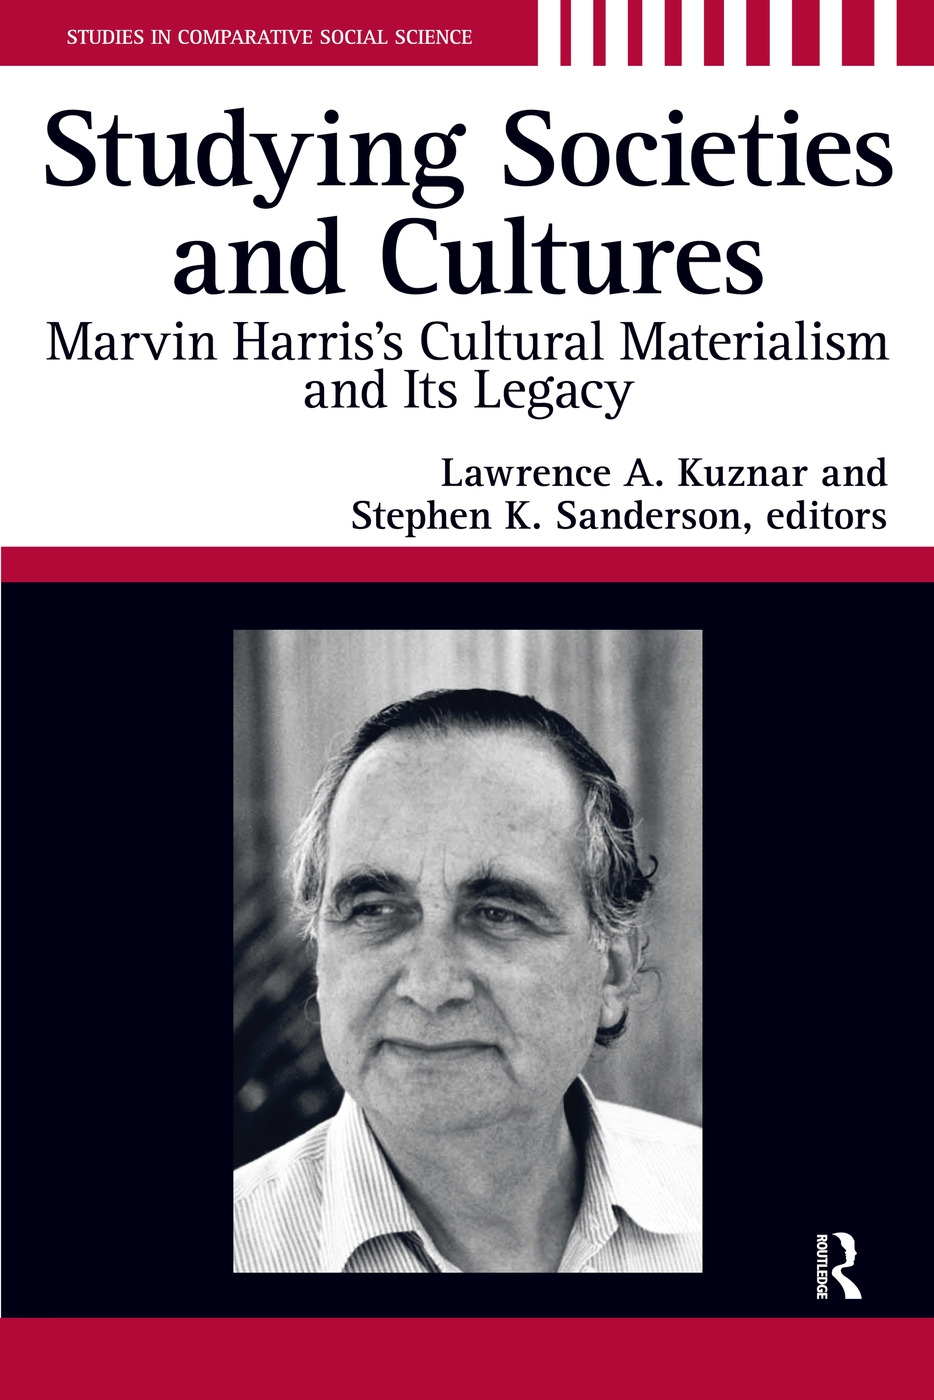 Studying Societies and Cultures: Marvin Harris’s Cultural Materialism and Its Legacy